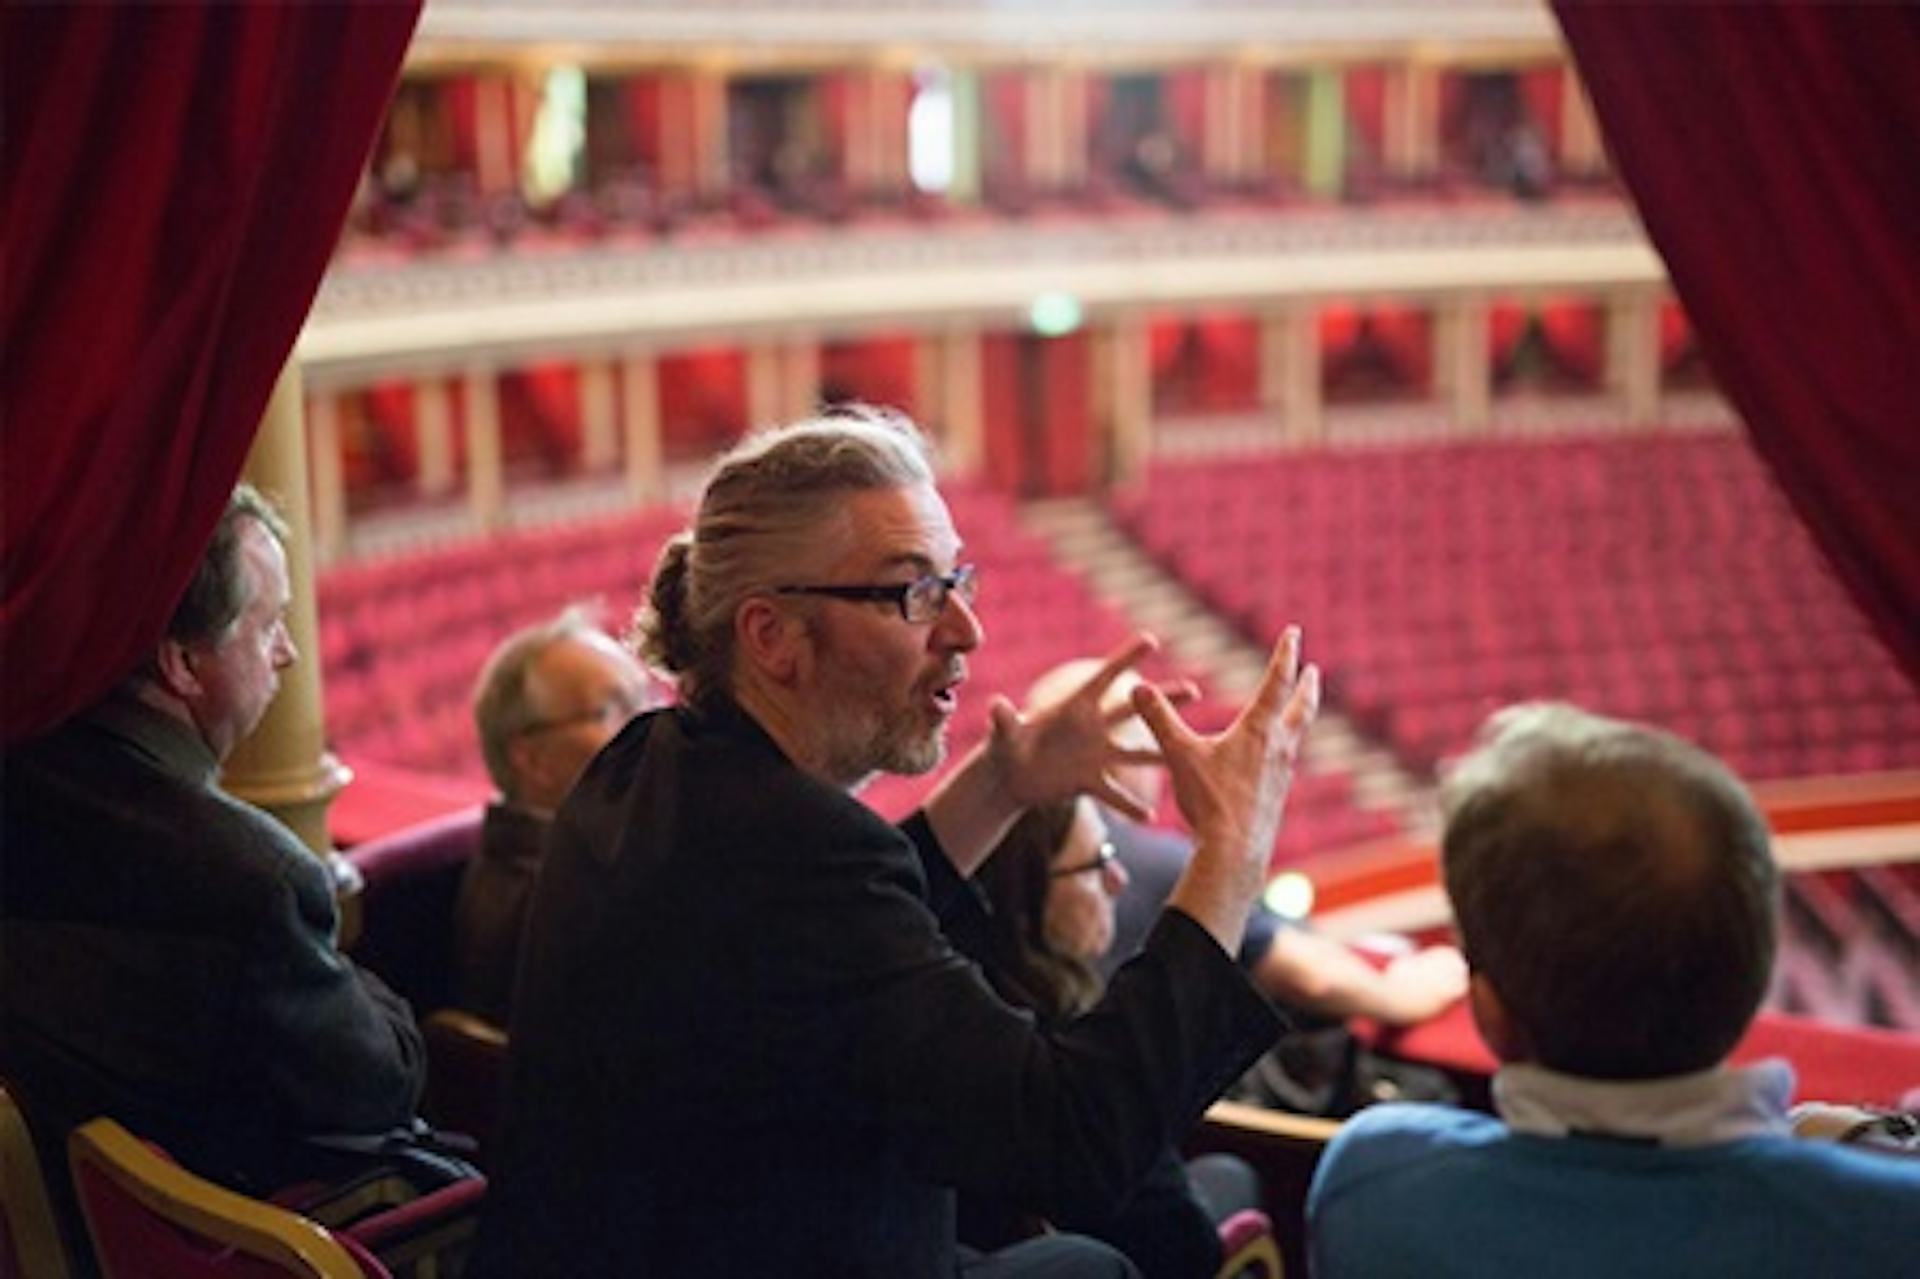 Royal Albert Hall Tour and Three Course Lunch with Wine for Two